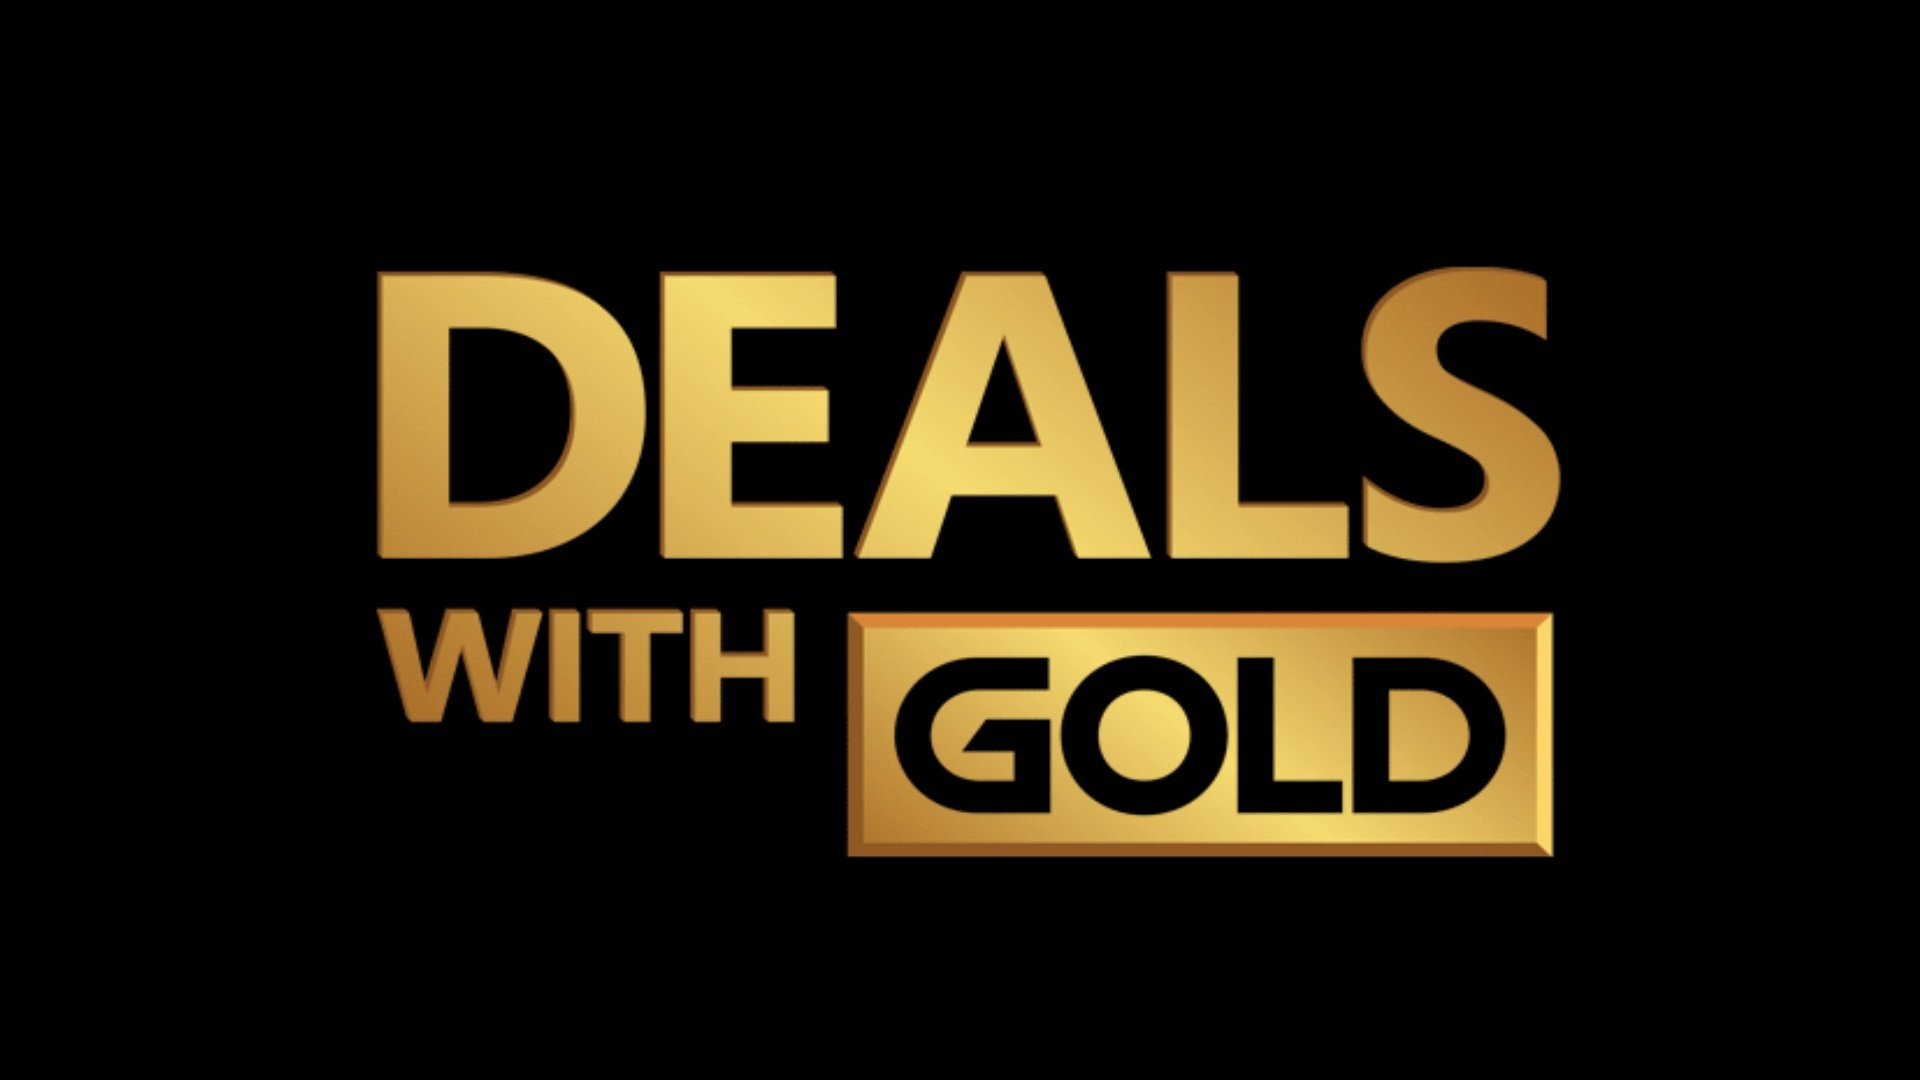 Deals with Gold semaine 02